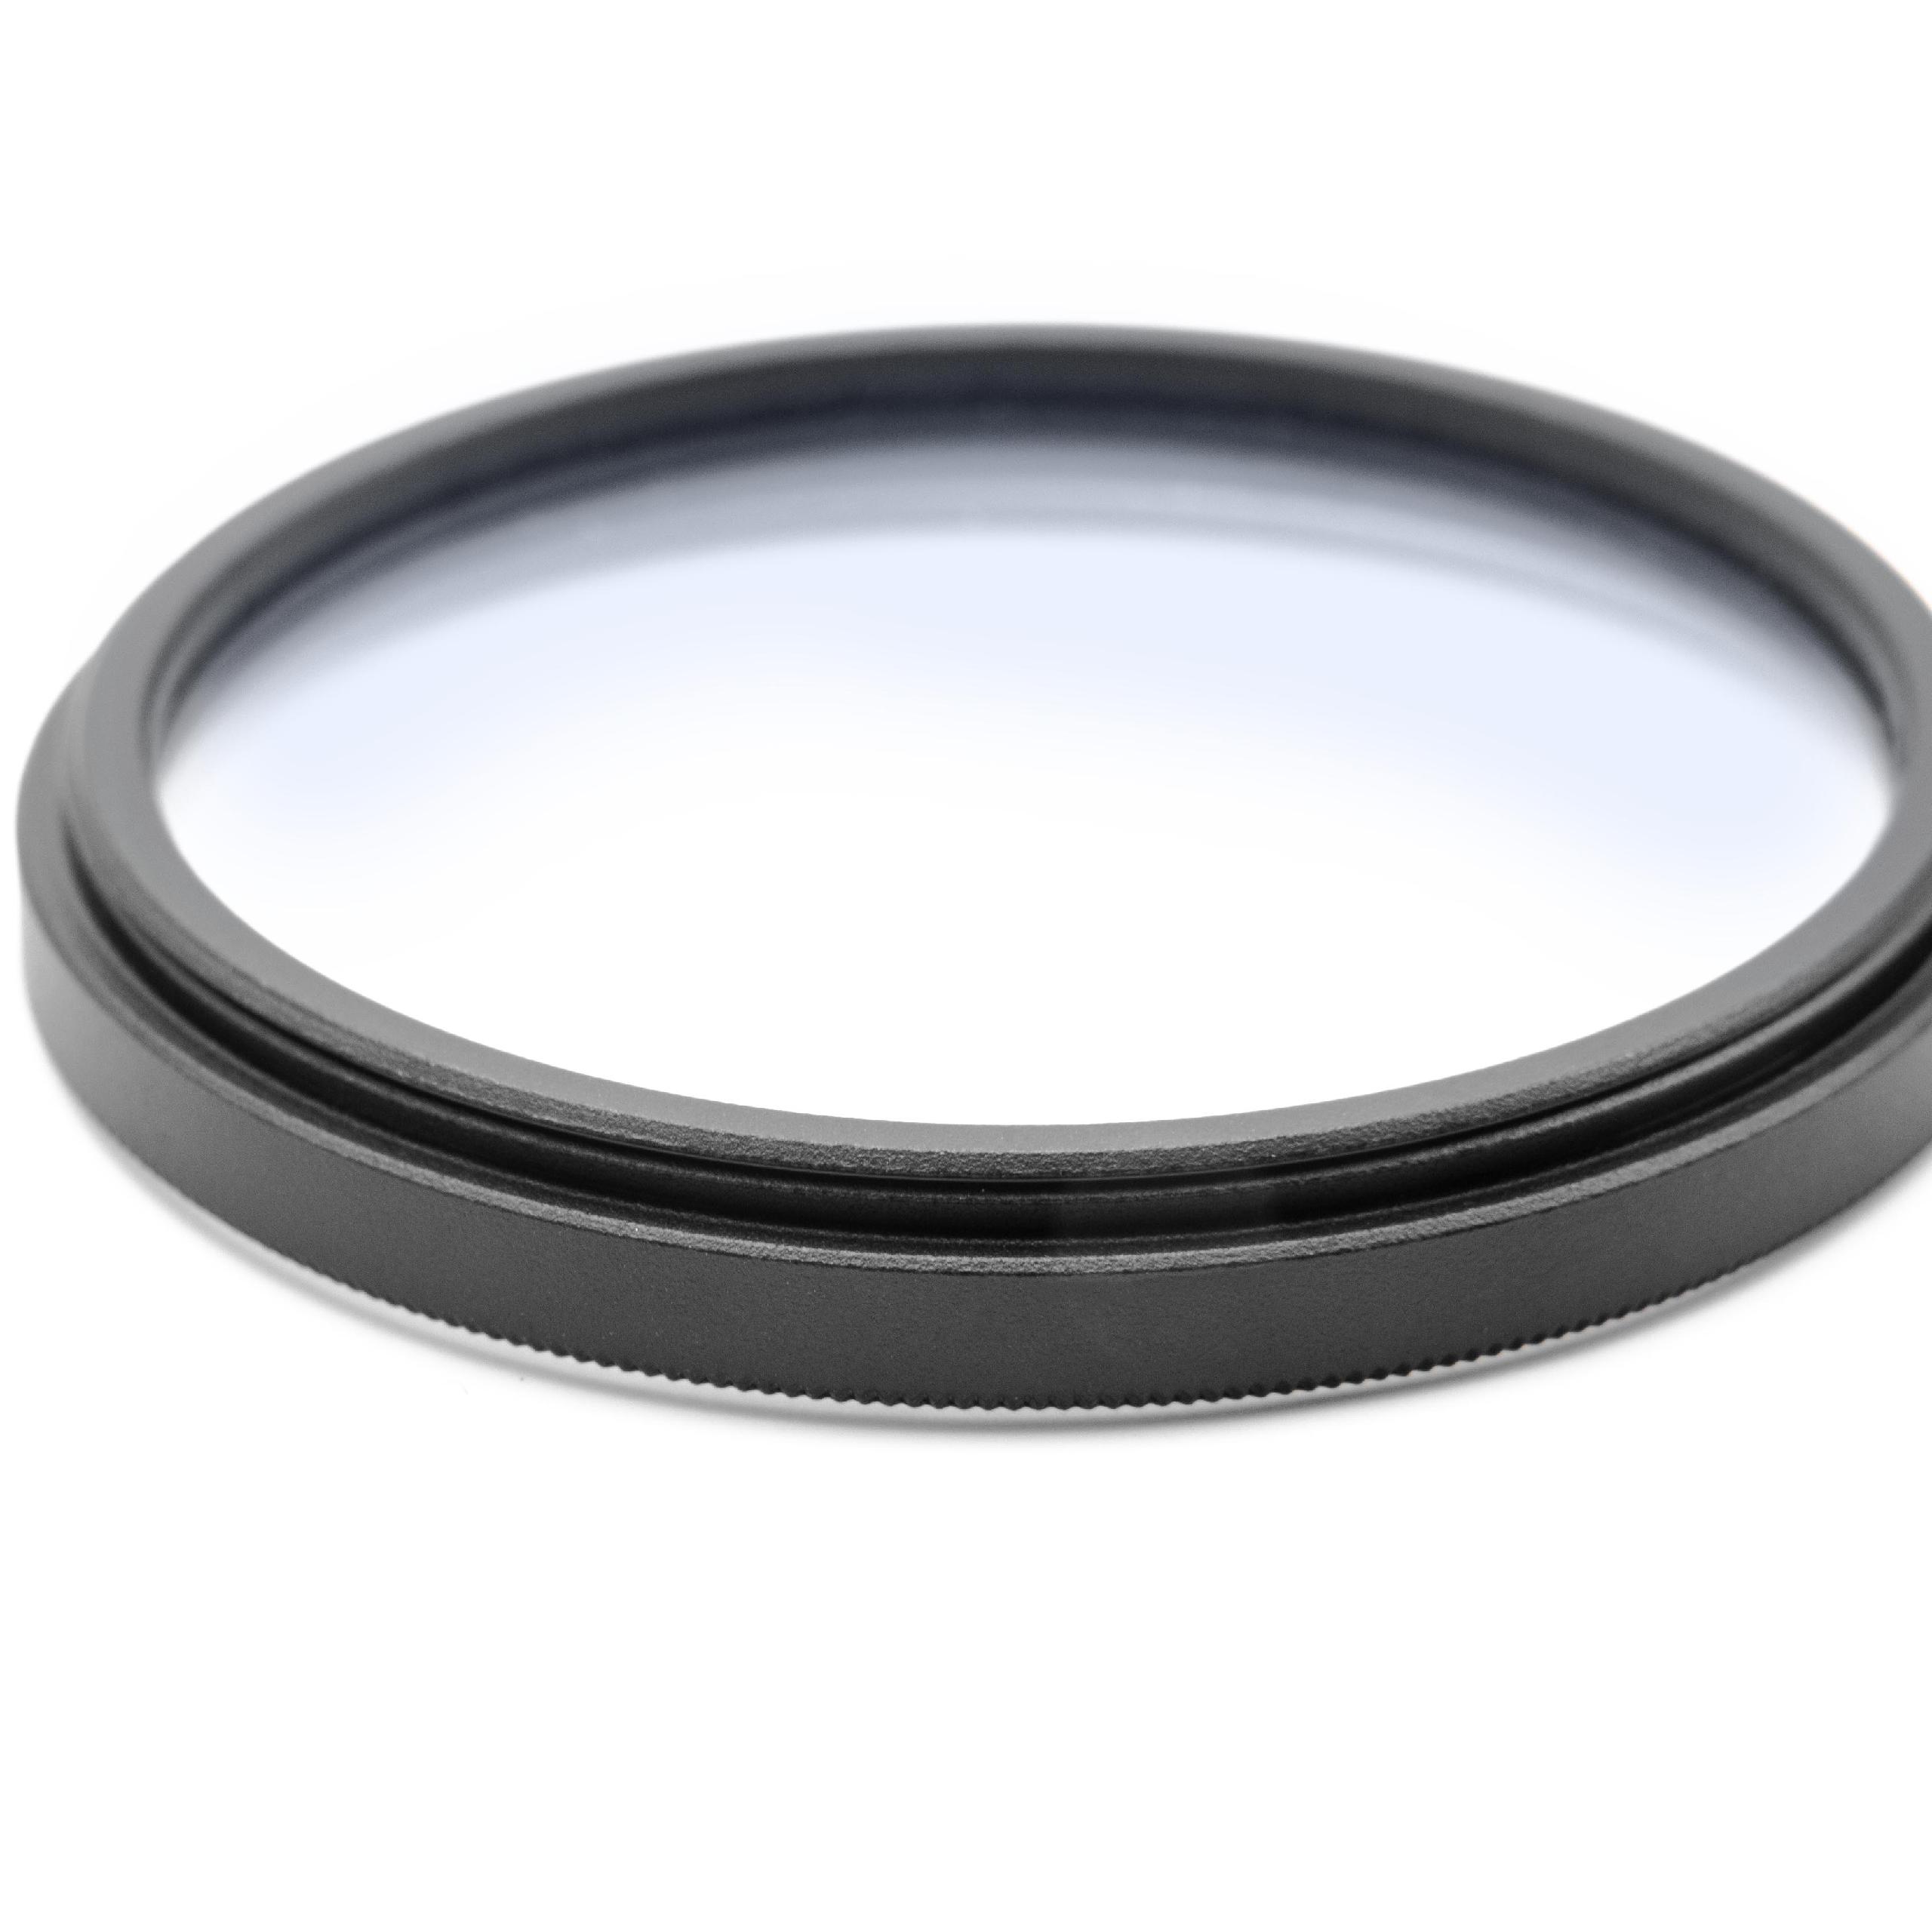 Soft Focus Filter suitable for Cameras & Lenses with 49 mm Filter Thread - Soft Filter